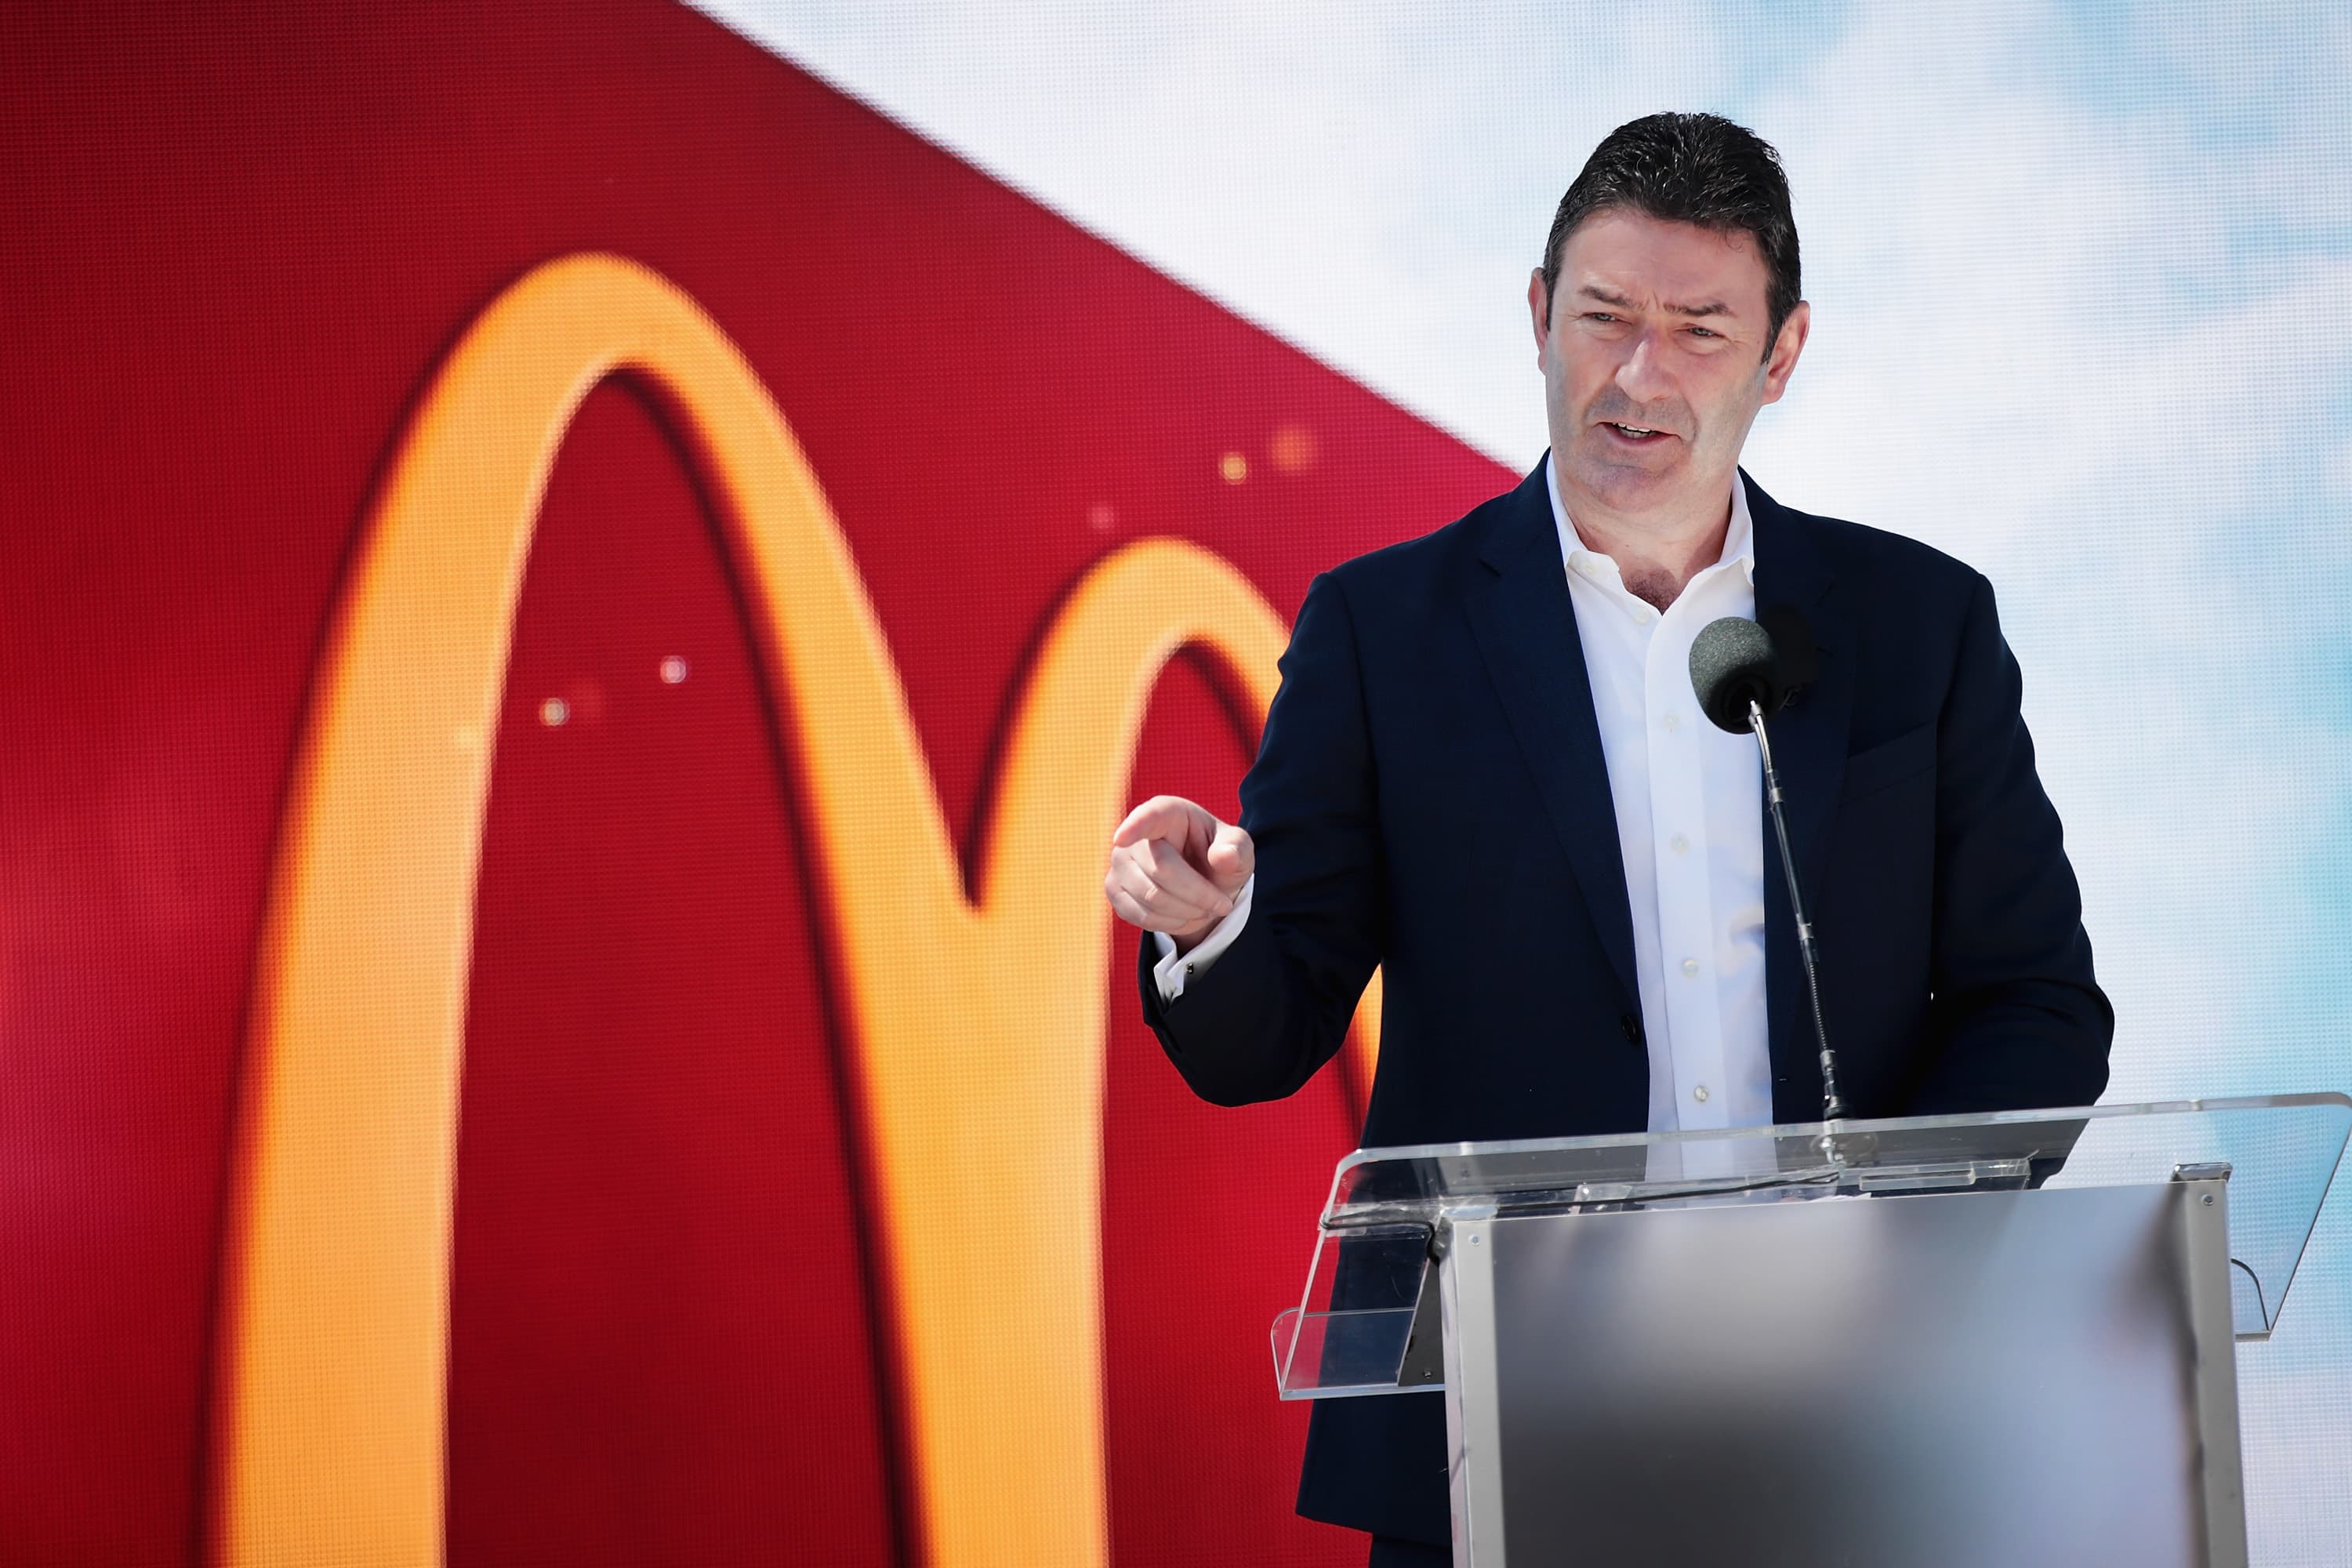 McDonald’s claws back $105 million from fired CEO Easterbrook, accused of hiding relationships from board